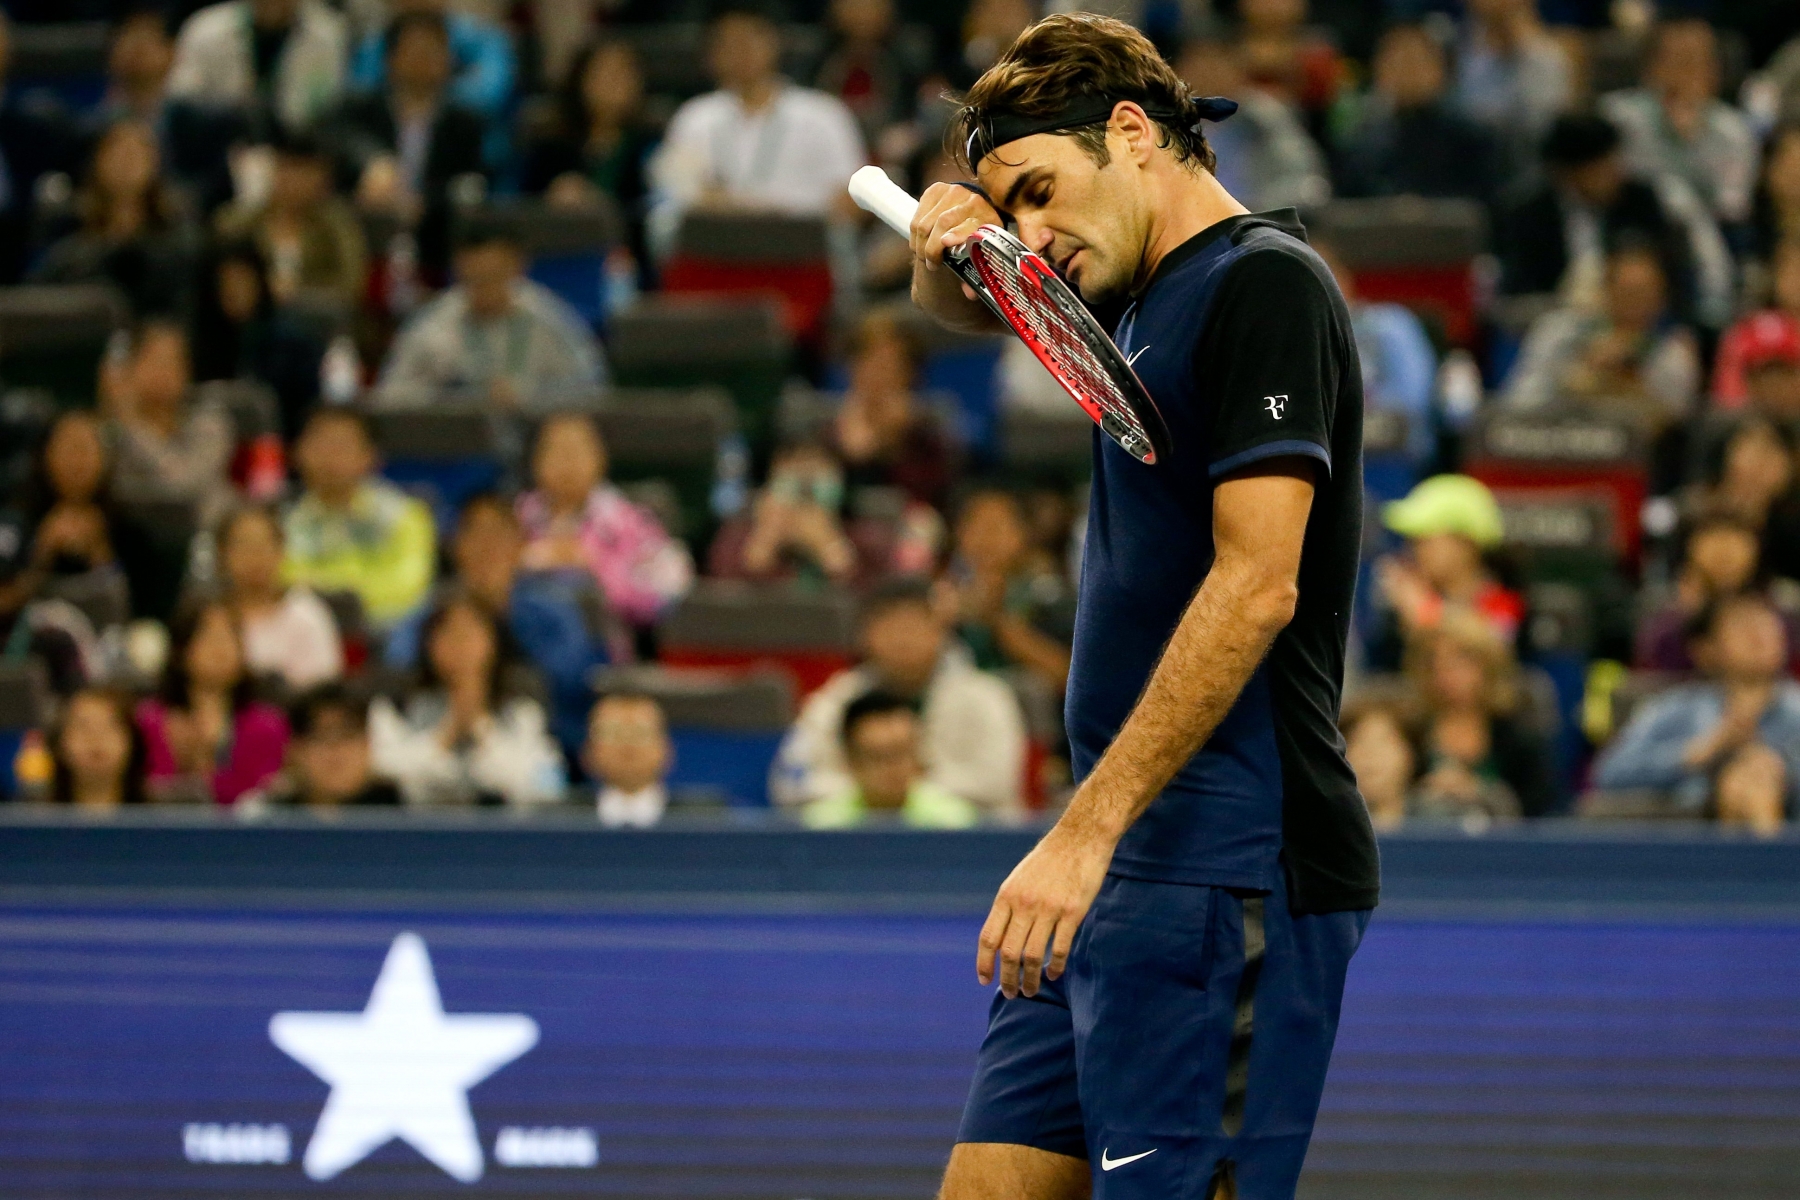 Roger Federer of Switzerland reacts while playing against Albert Ramos-Vinolas of Spain during their men's singles match at the Shanghai Masters tennis tournament in Shanghai, China Tuesday Oct. 13, 2015. (Chinatopix via AP) CHINA OUT  China Shanghai Masters Tennis